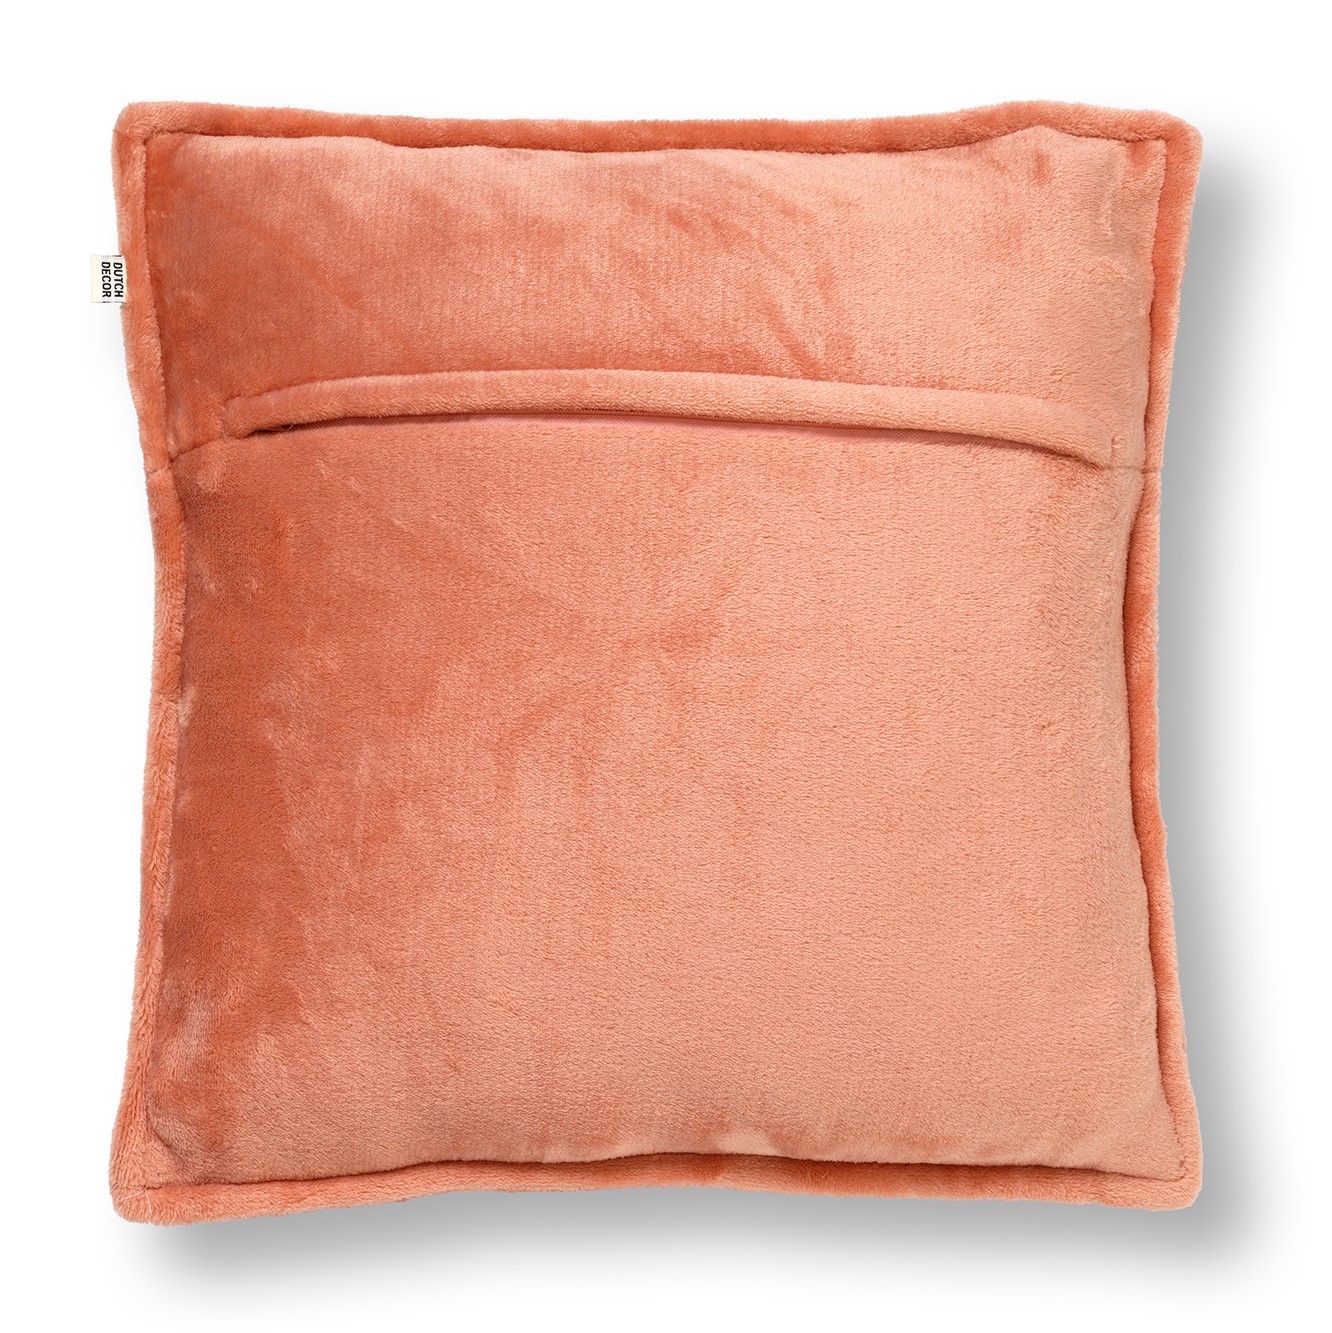 CILLY - Kussenhoes fleece 45x45 cm - Muted Clay - roze